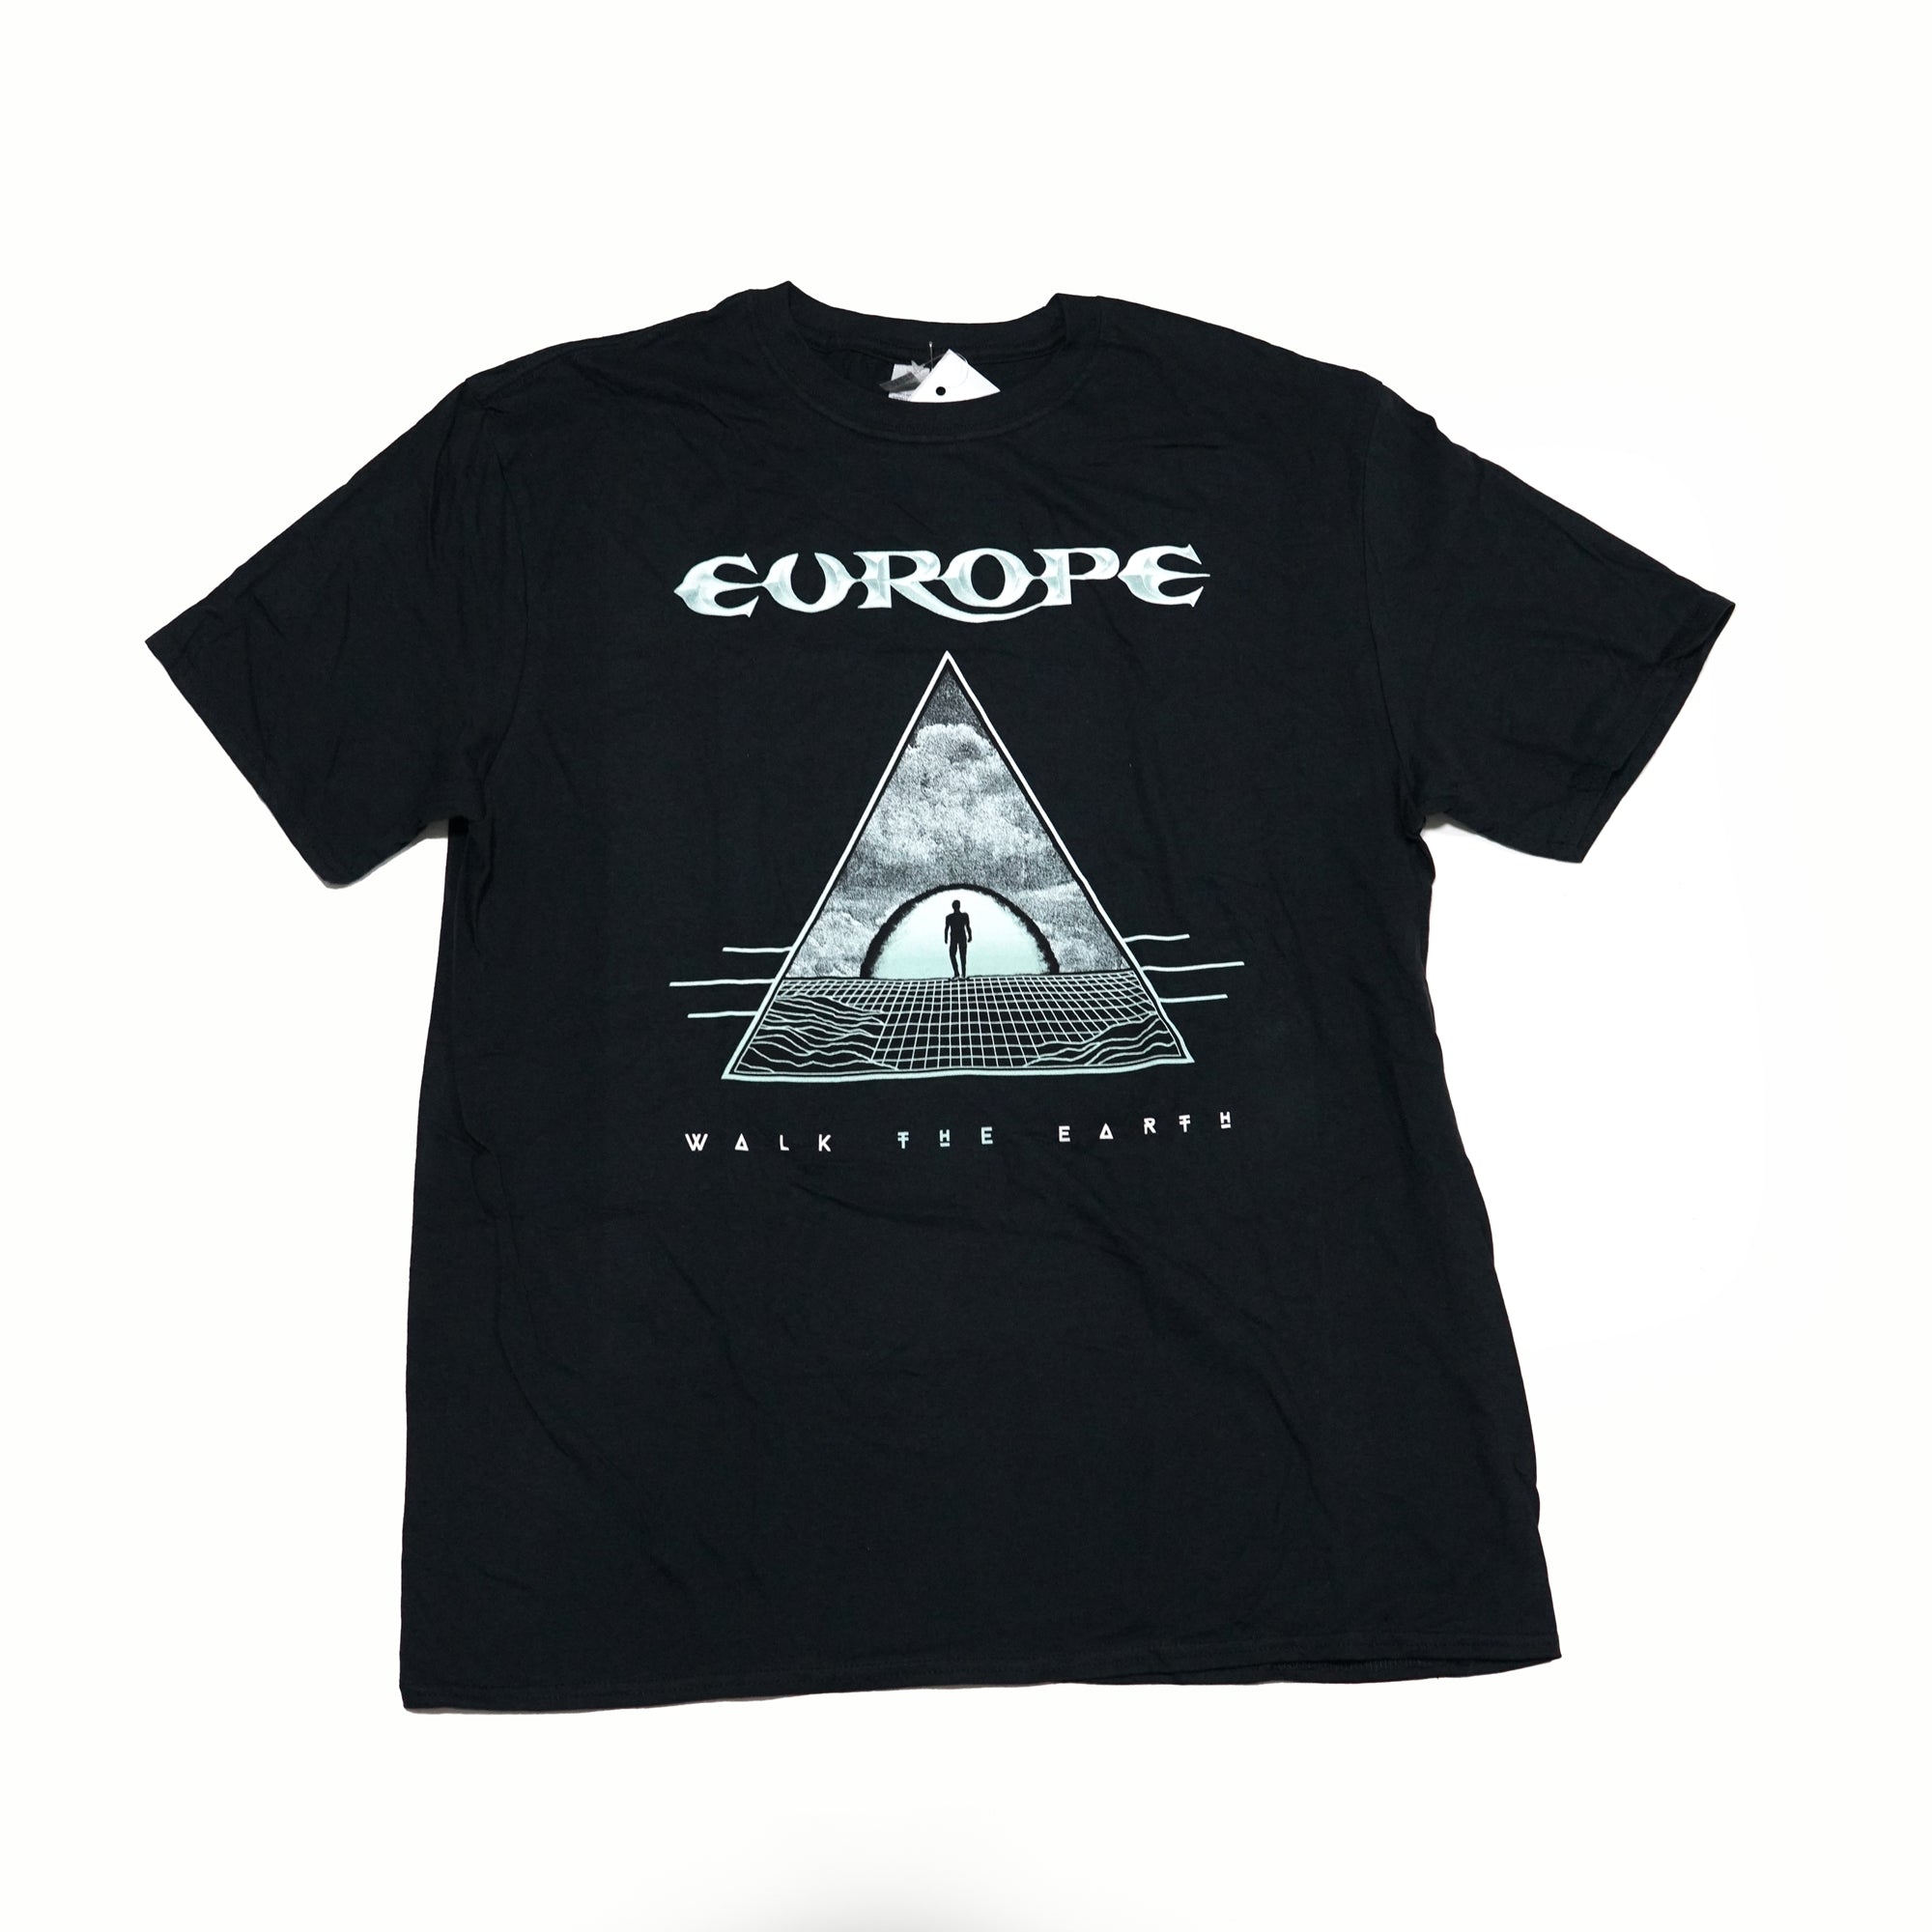 No:EURTS02MB | Artist:Europe | Name:Walk The Earth | Color:Black | Size:L/1XL【ROCK OFF】【ネコポス選択可能】